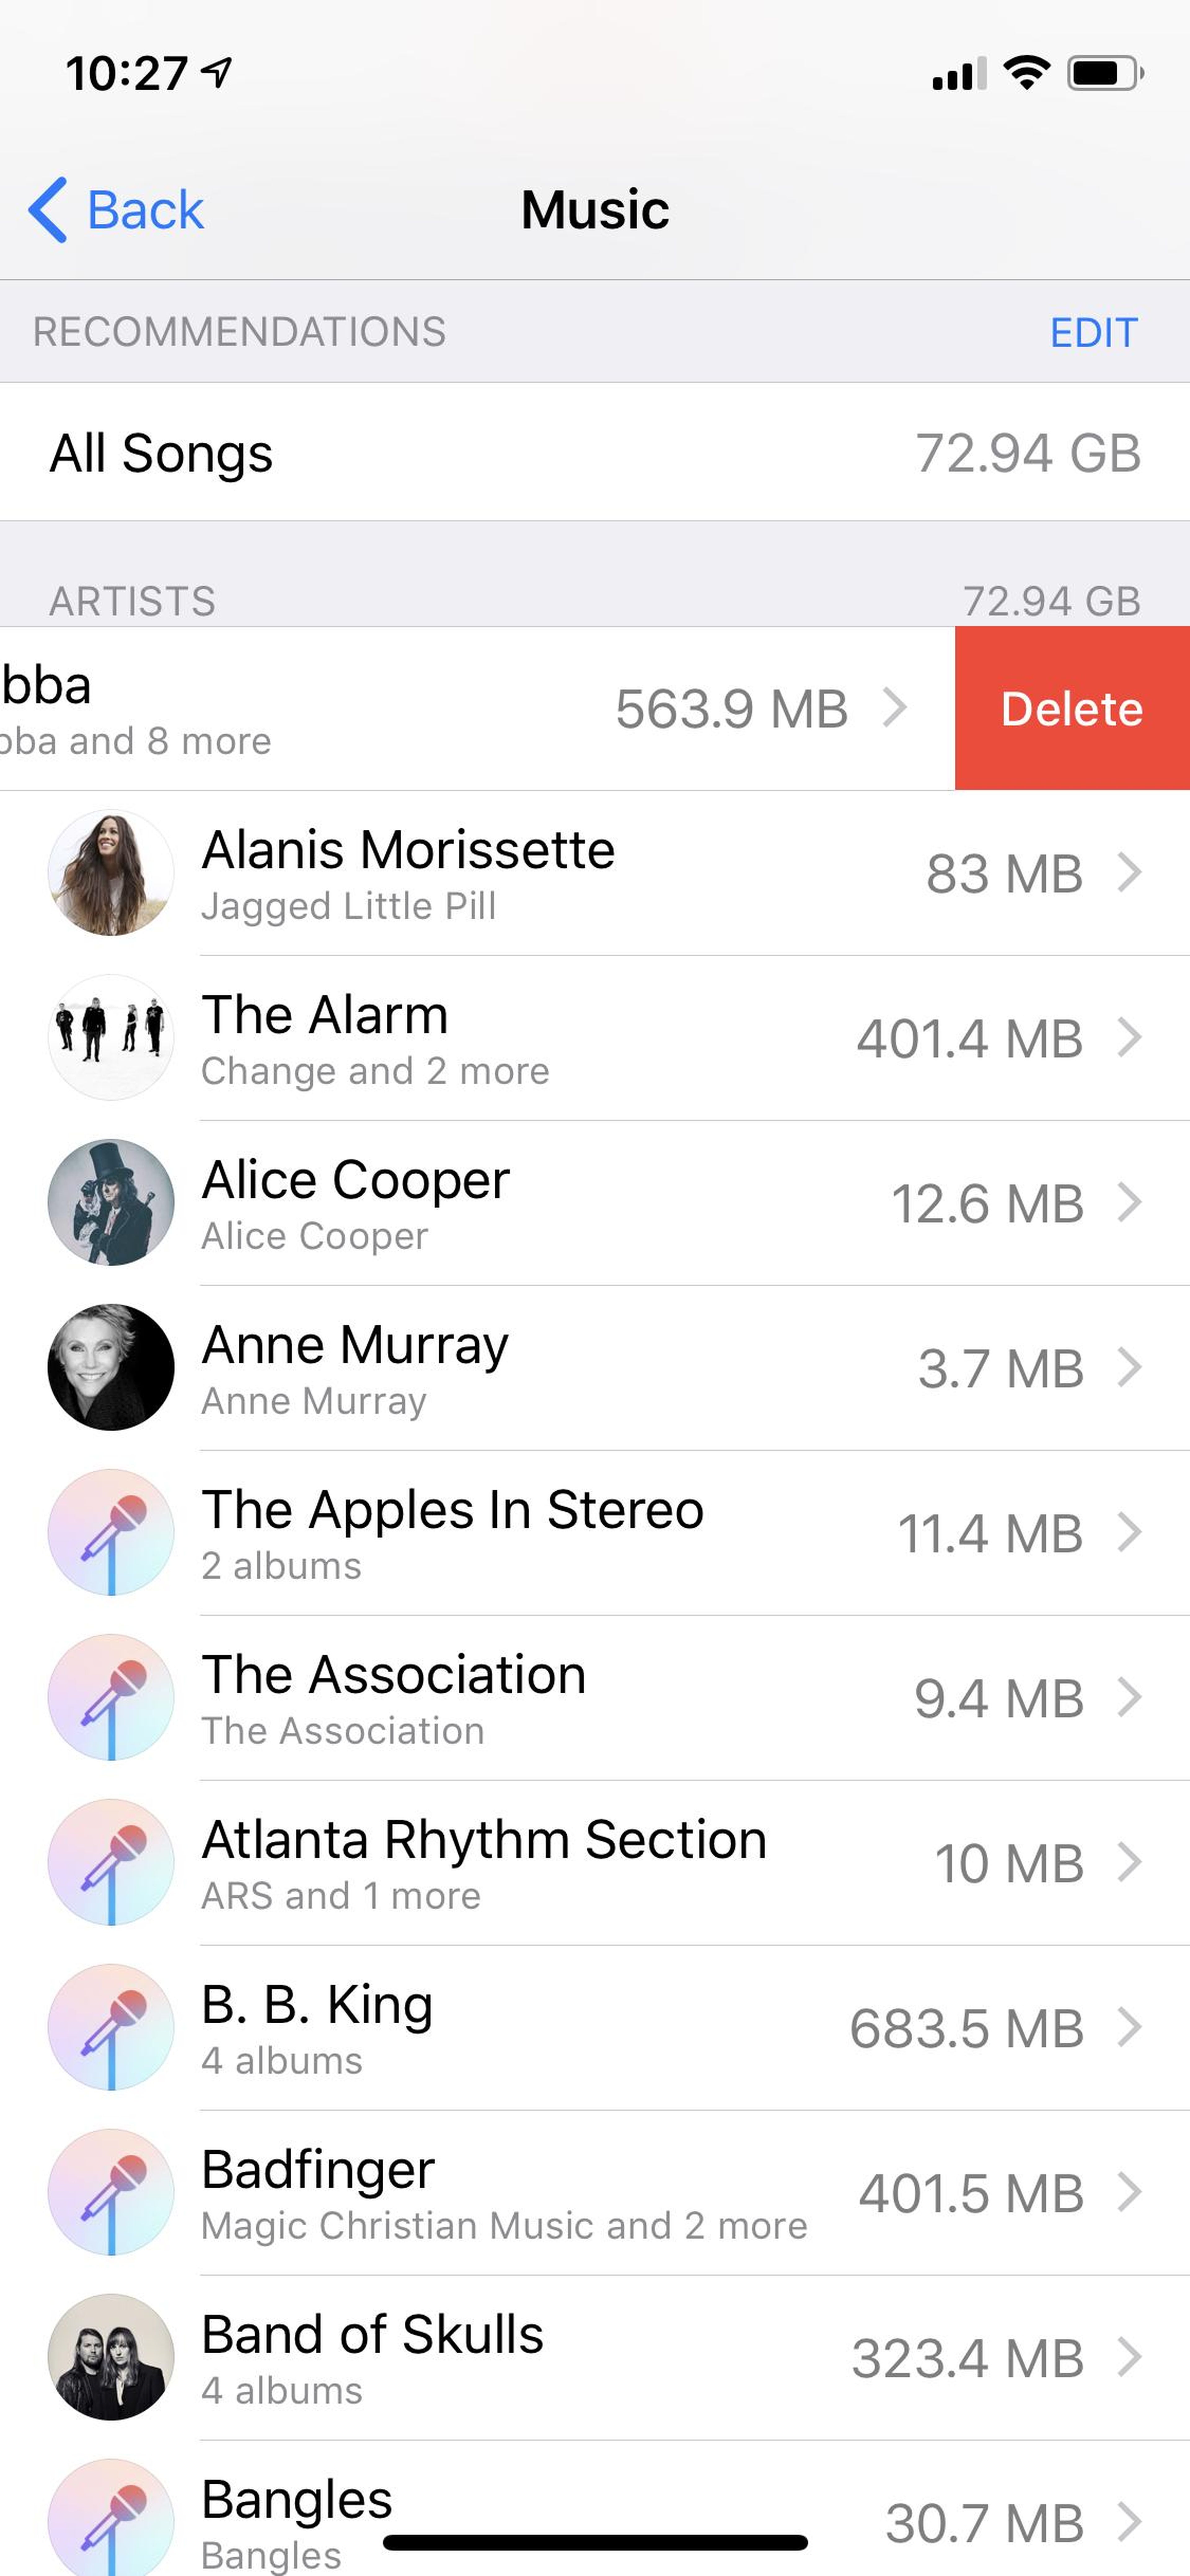 You can swipe to remove all the tracks from specific, memory-hogging artists.